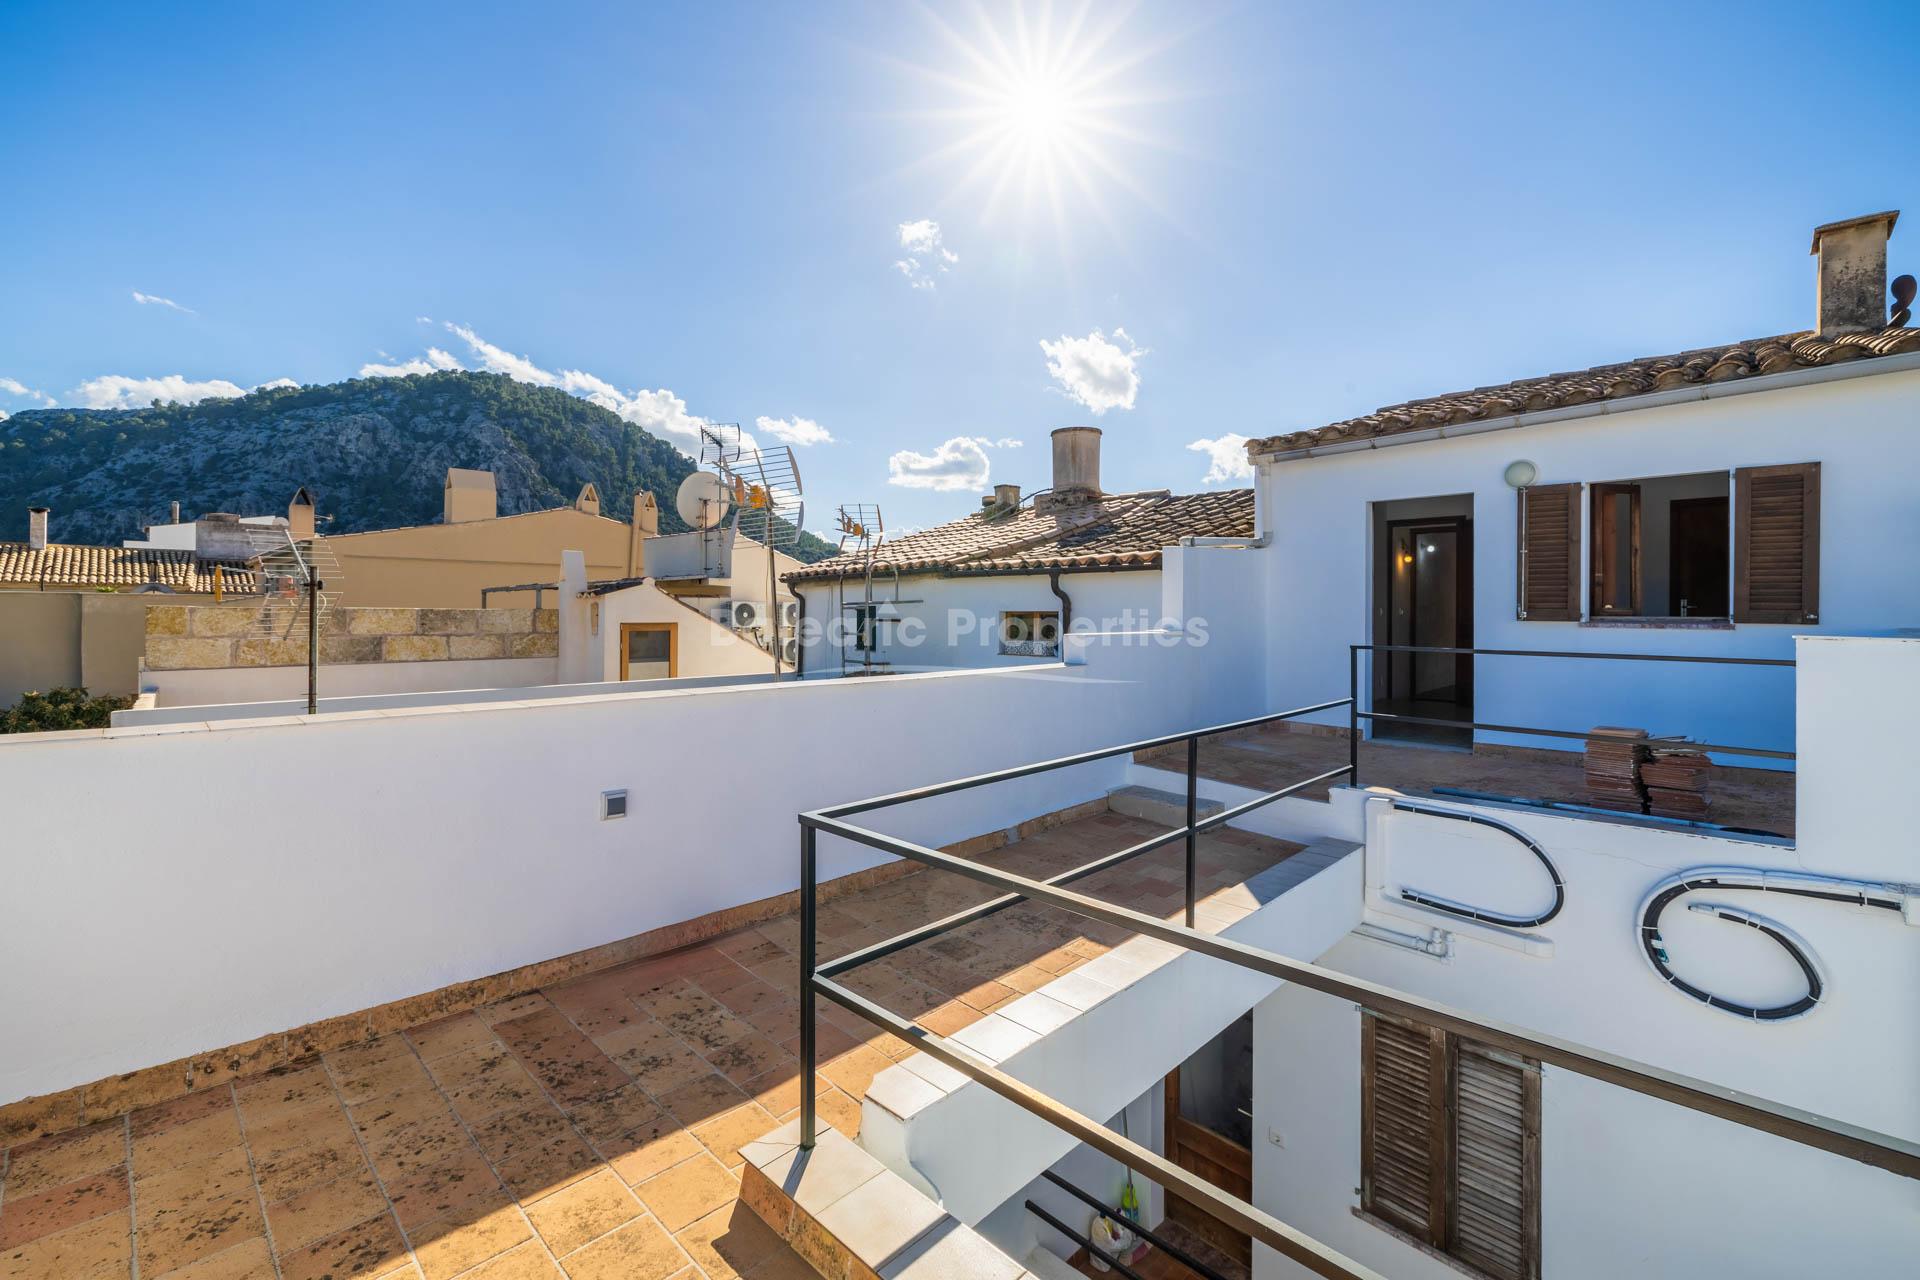 Town house investment for sale in the heart of Pollensa, Mallorca